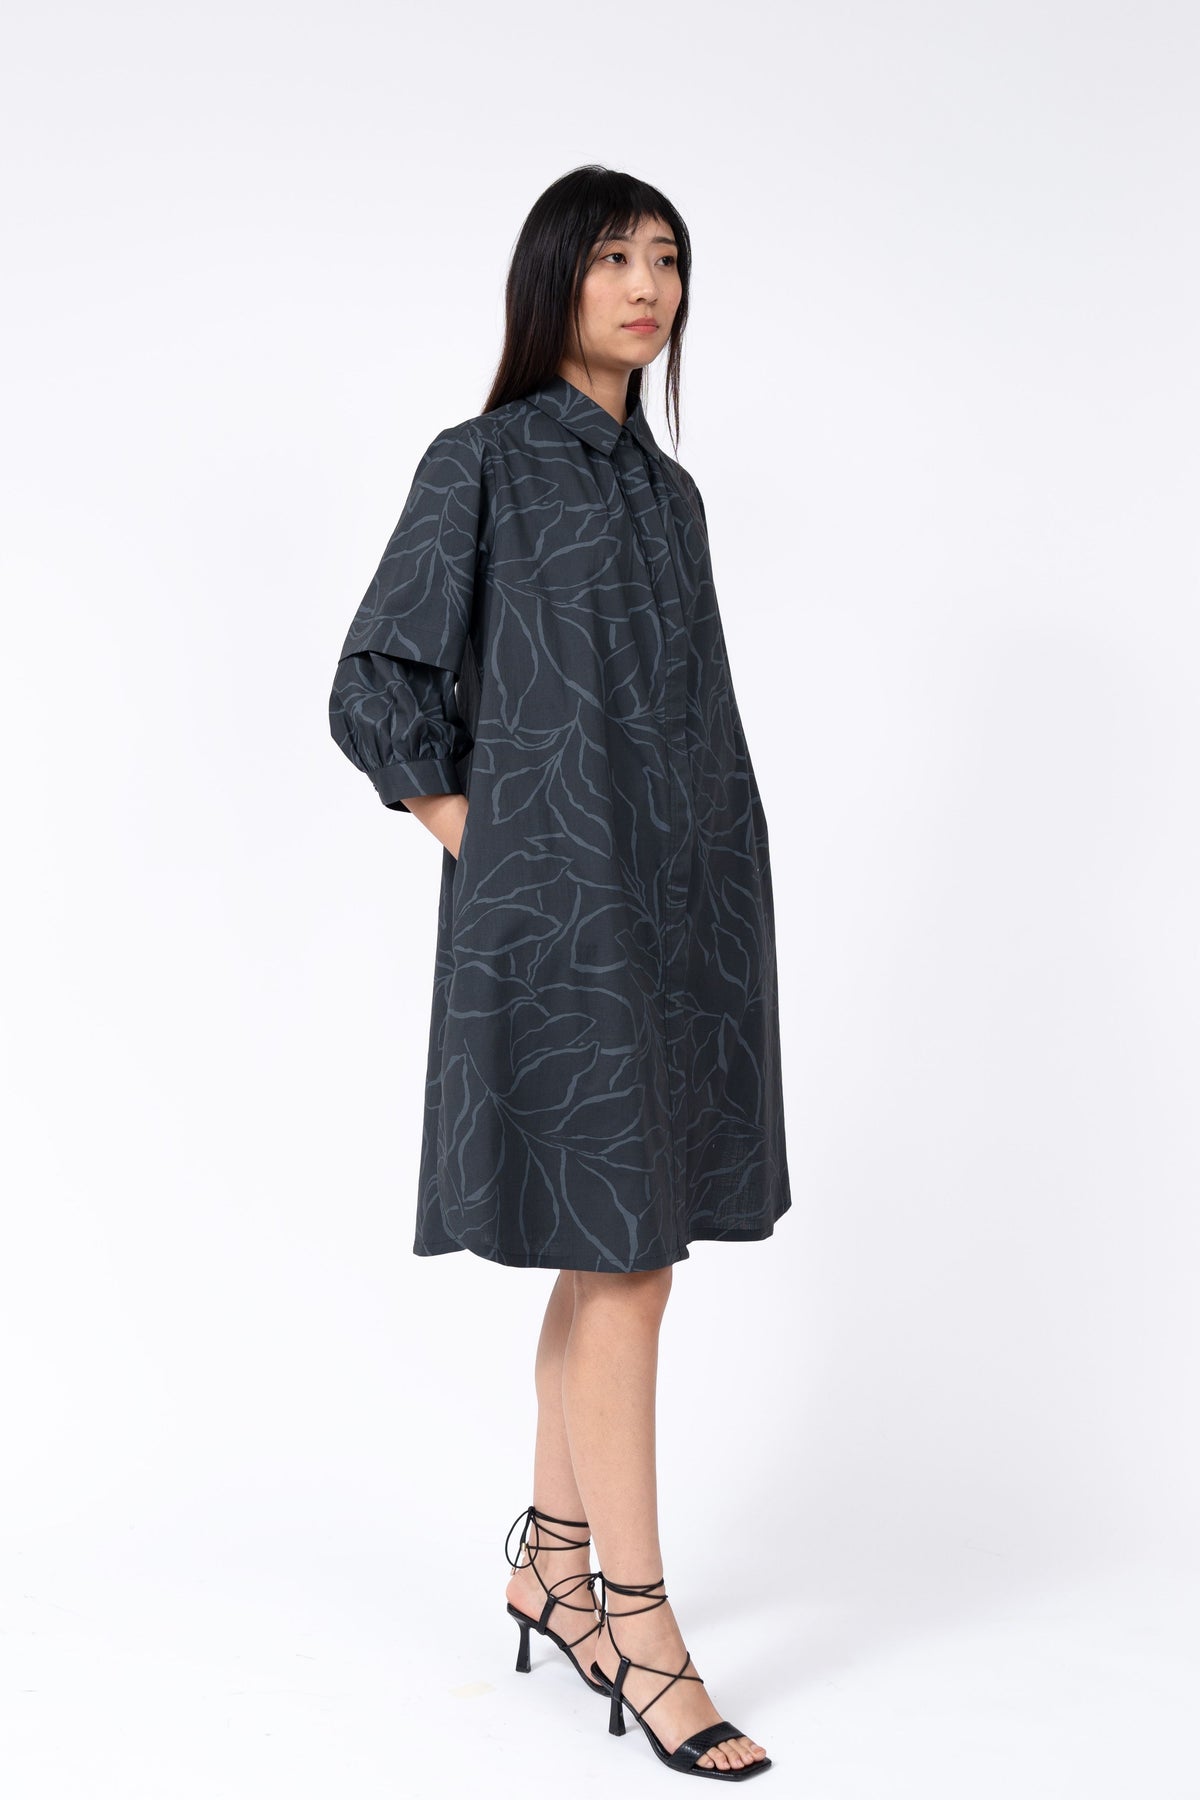 Abstract Leaf Print Fence Dress